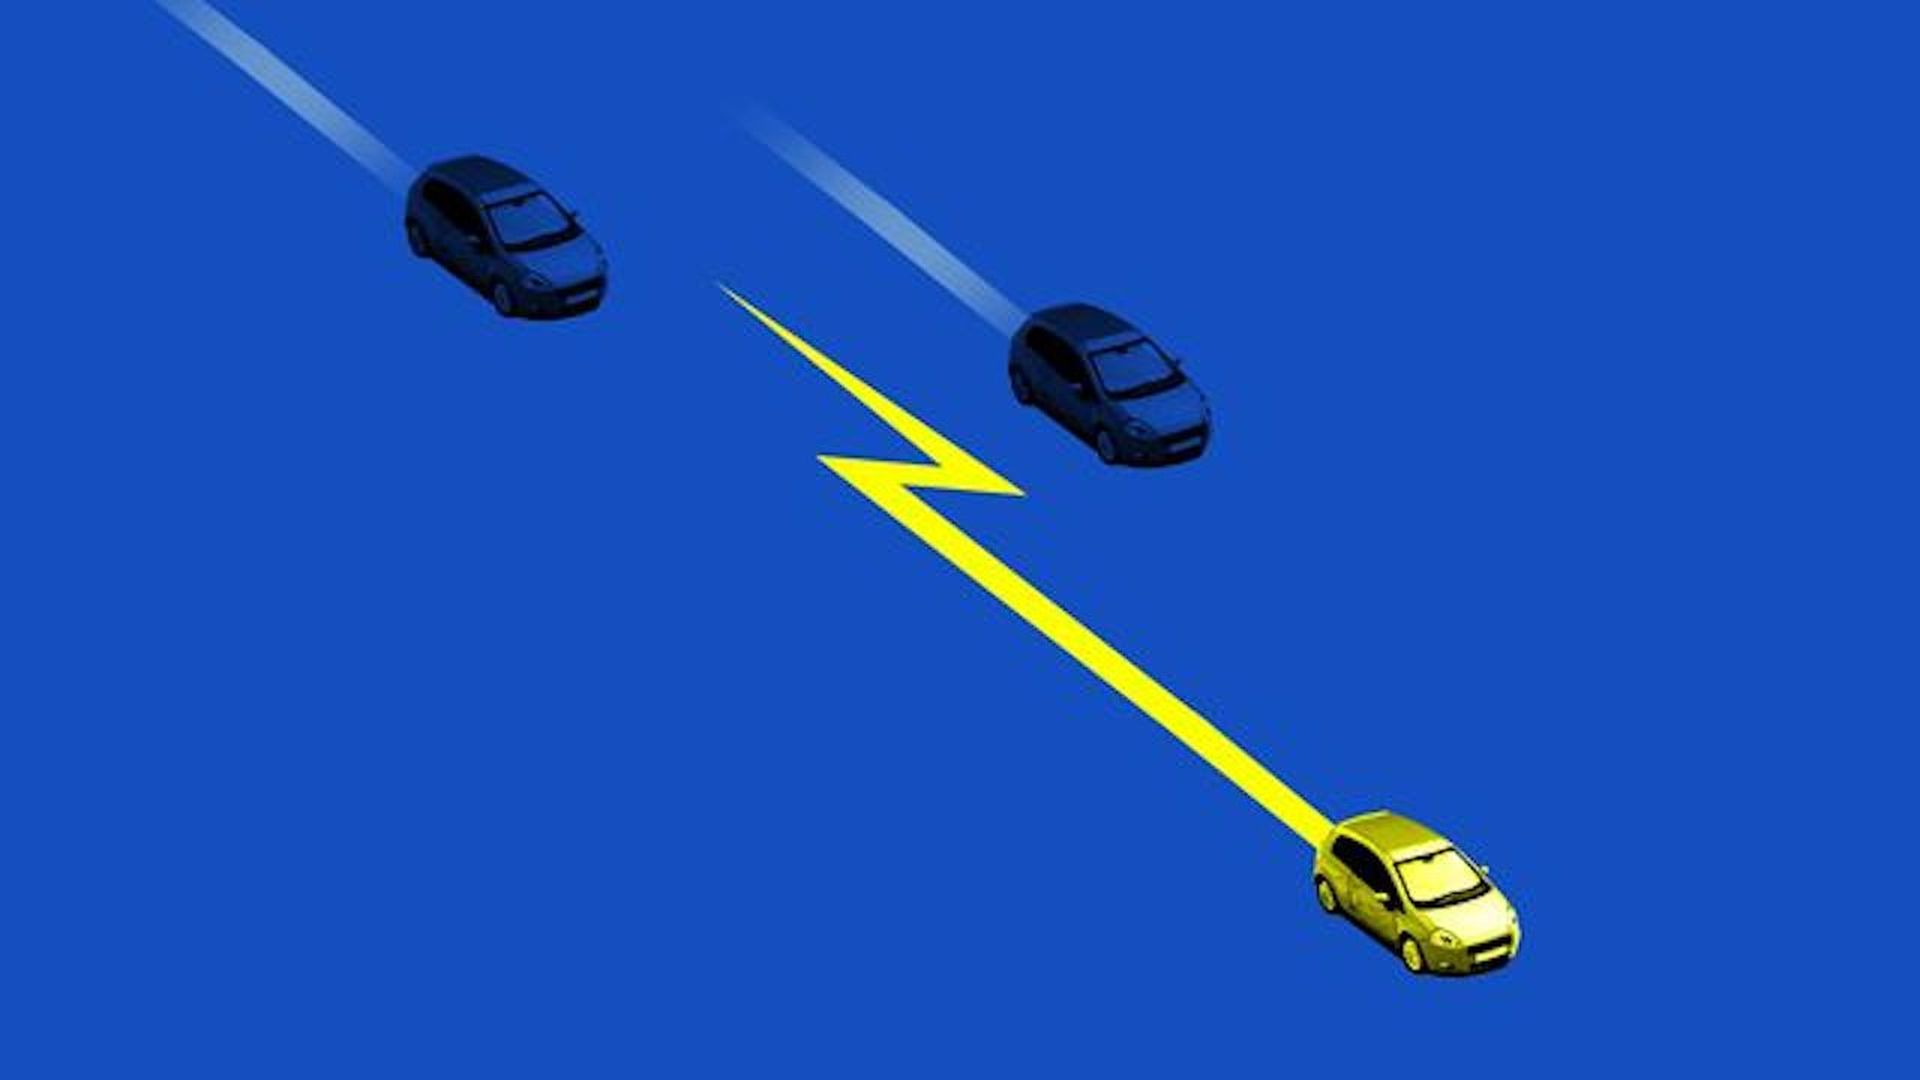 Illustration of cars with lightning bolts behind them to suggest electric vehicles.